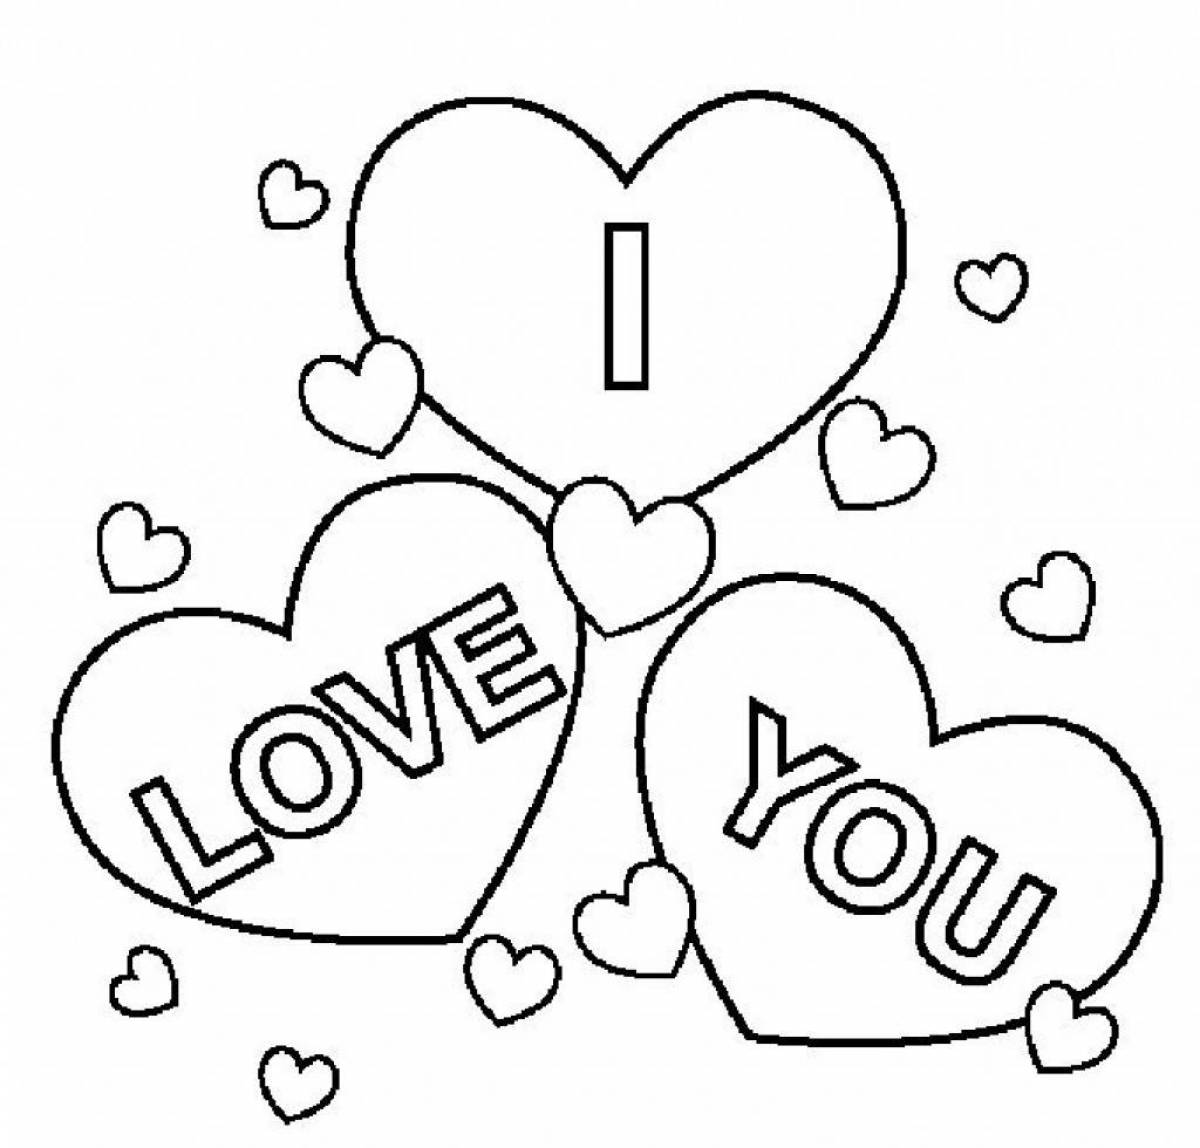 Transcendent love coloring page